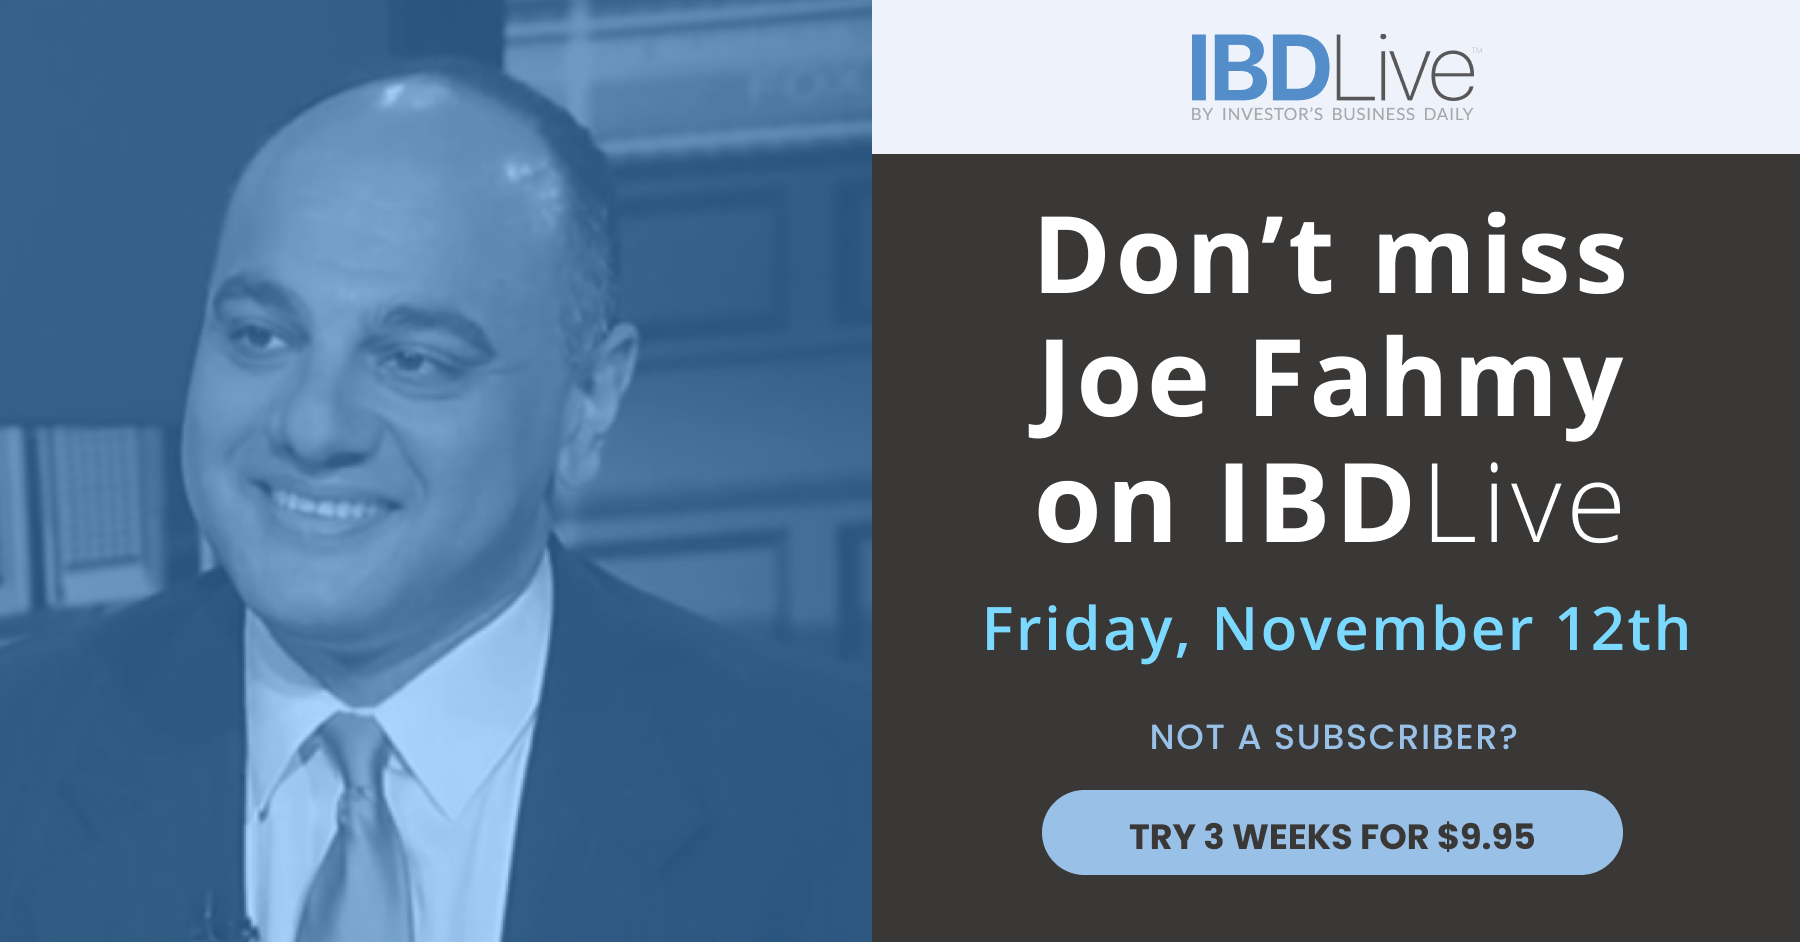 Don’t miss special guest Joe Fahmy on IBD Live